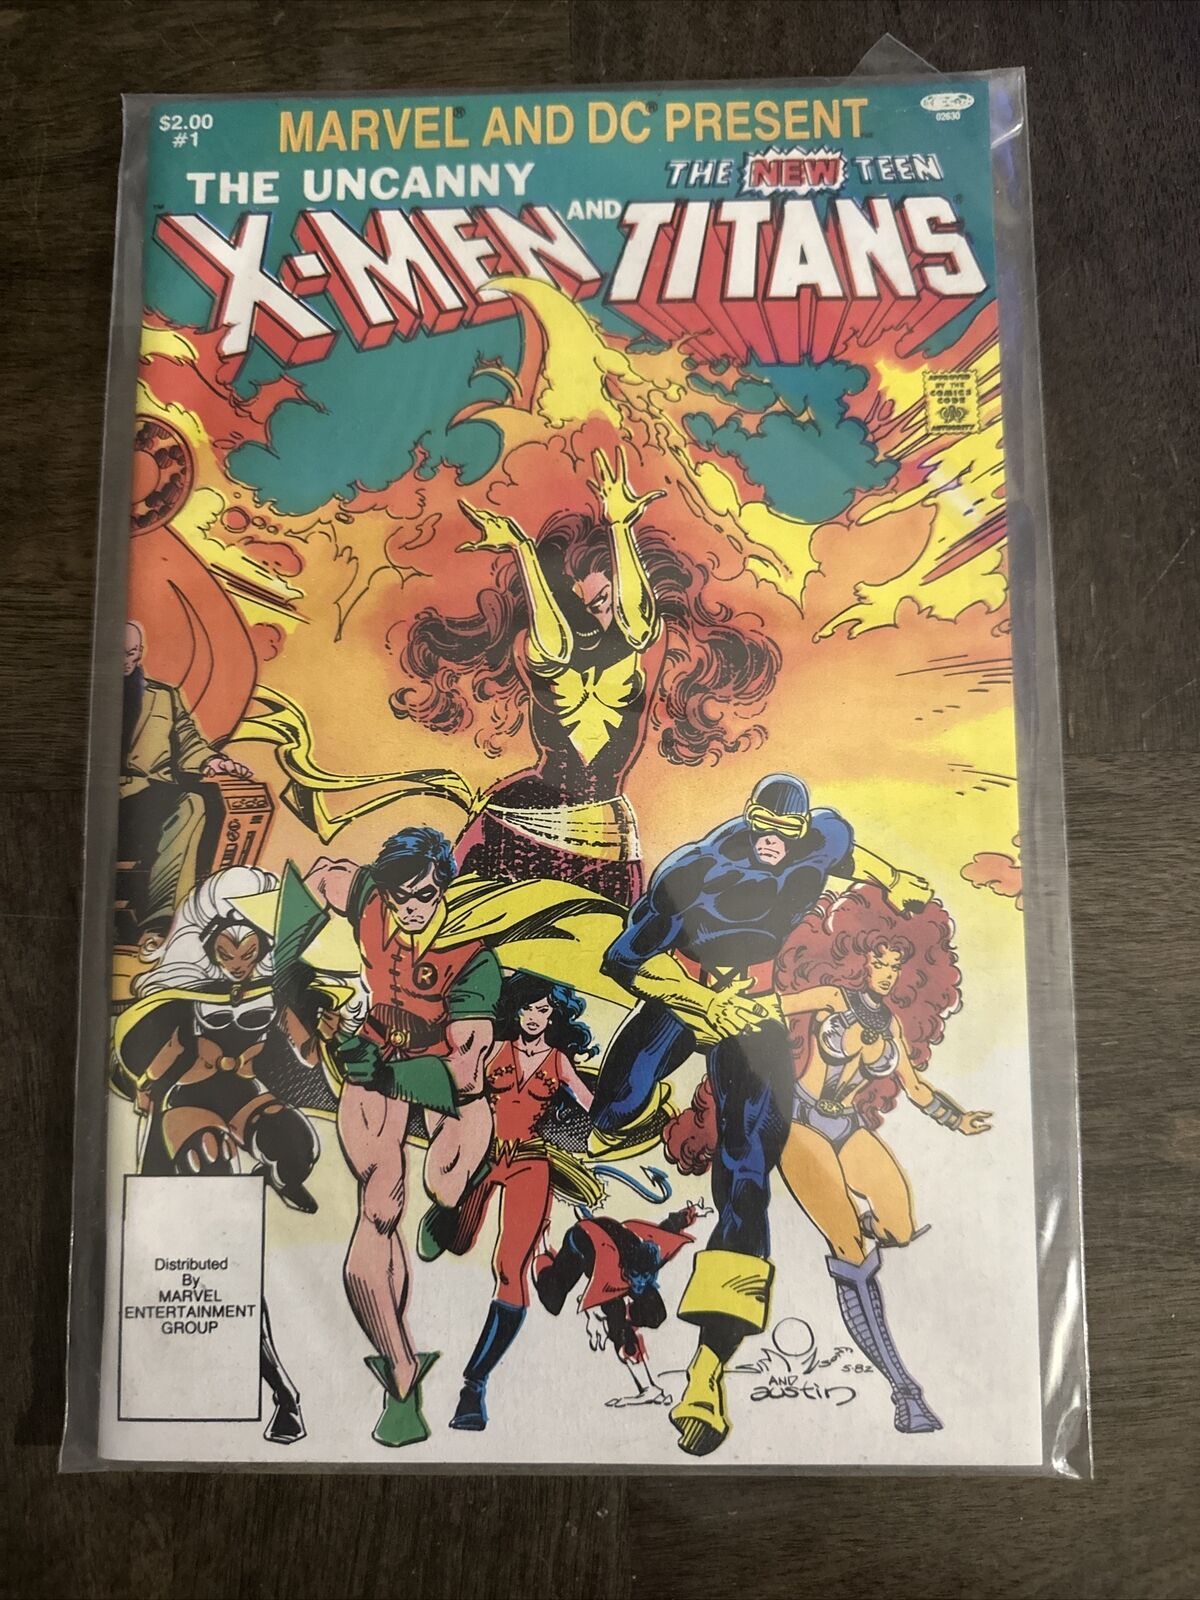 Marvel and DC Present the X-Men and the Teen Titans #1 Marvel/DC, 1982